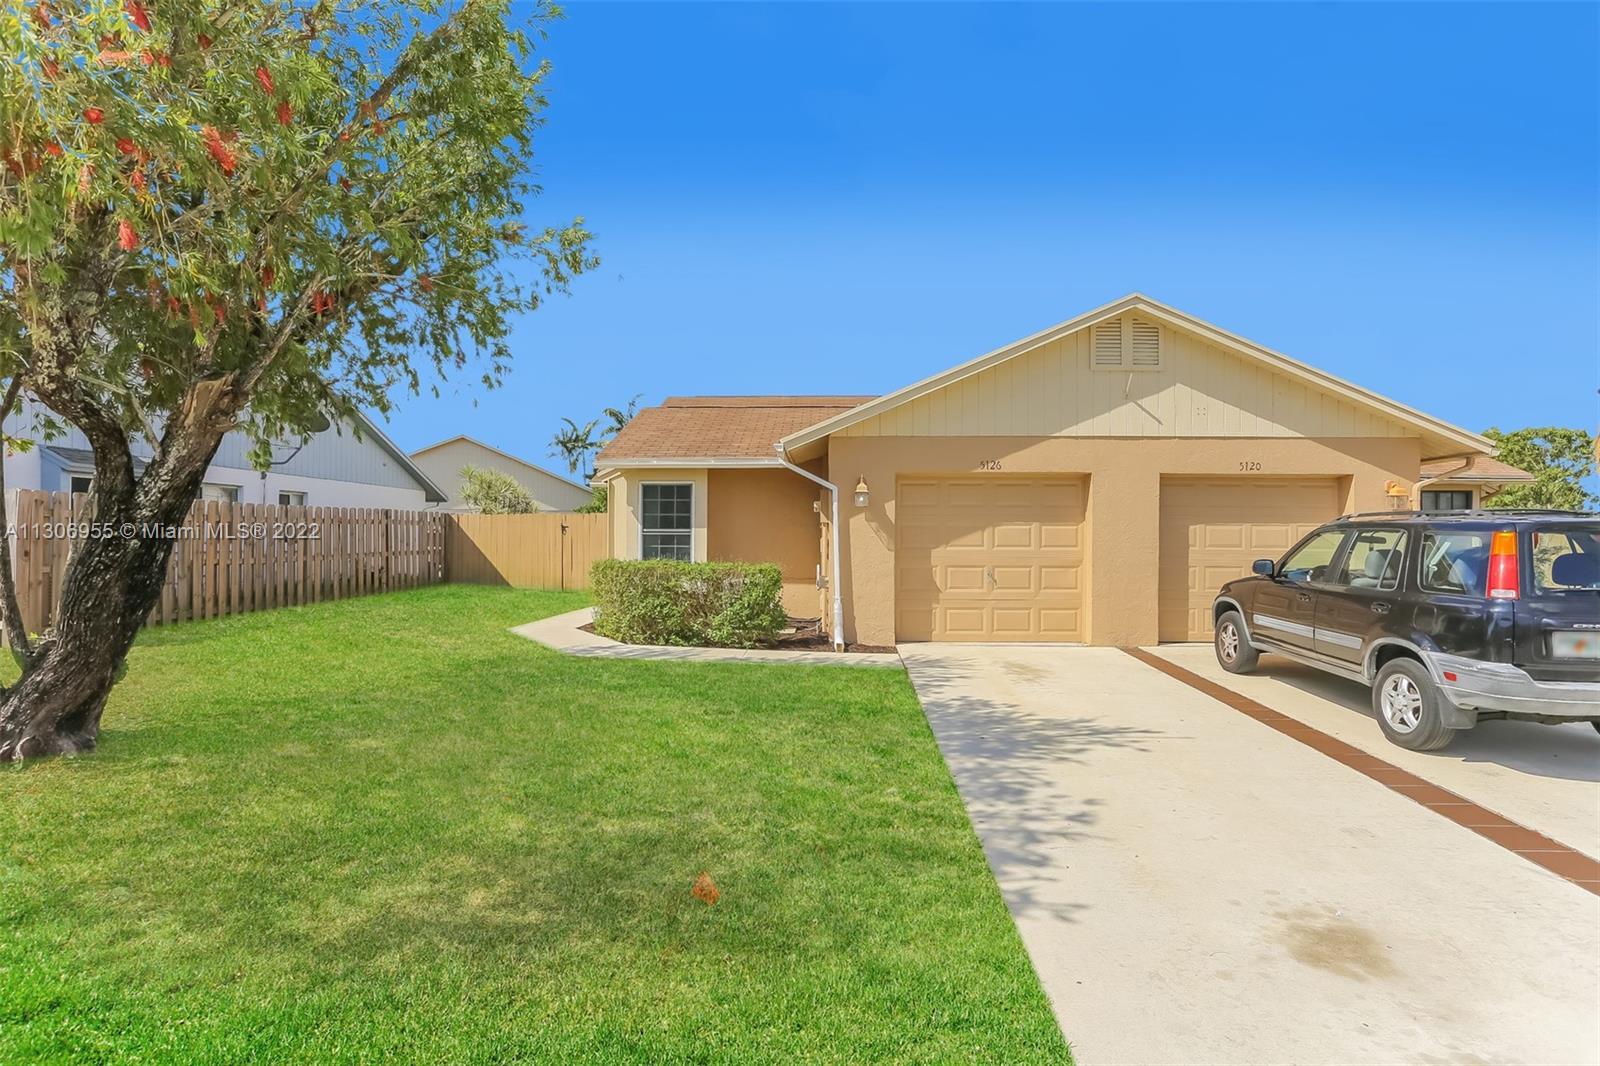 Priced to sell! Charming 3 bed/ 2 bath single-fee townhome in Lake Worth. Ready for your personal to